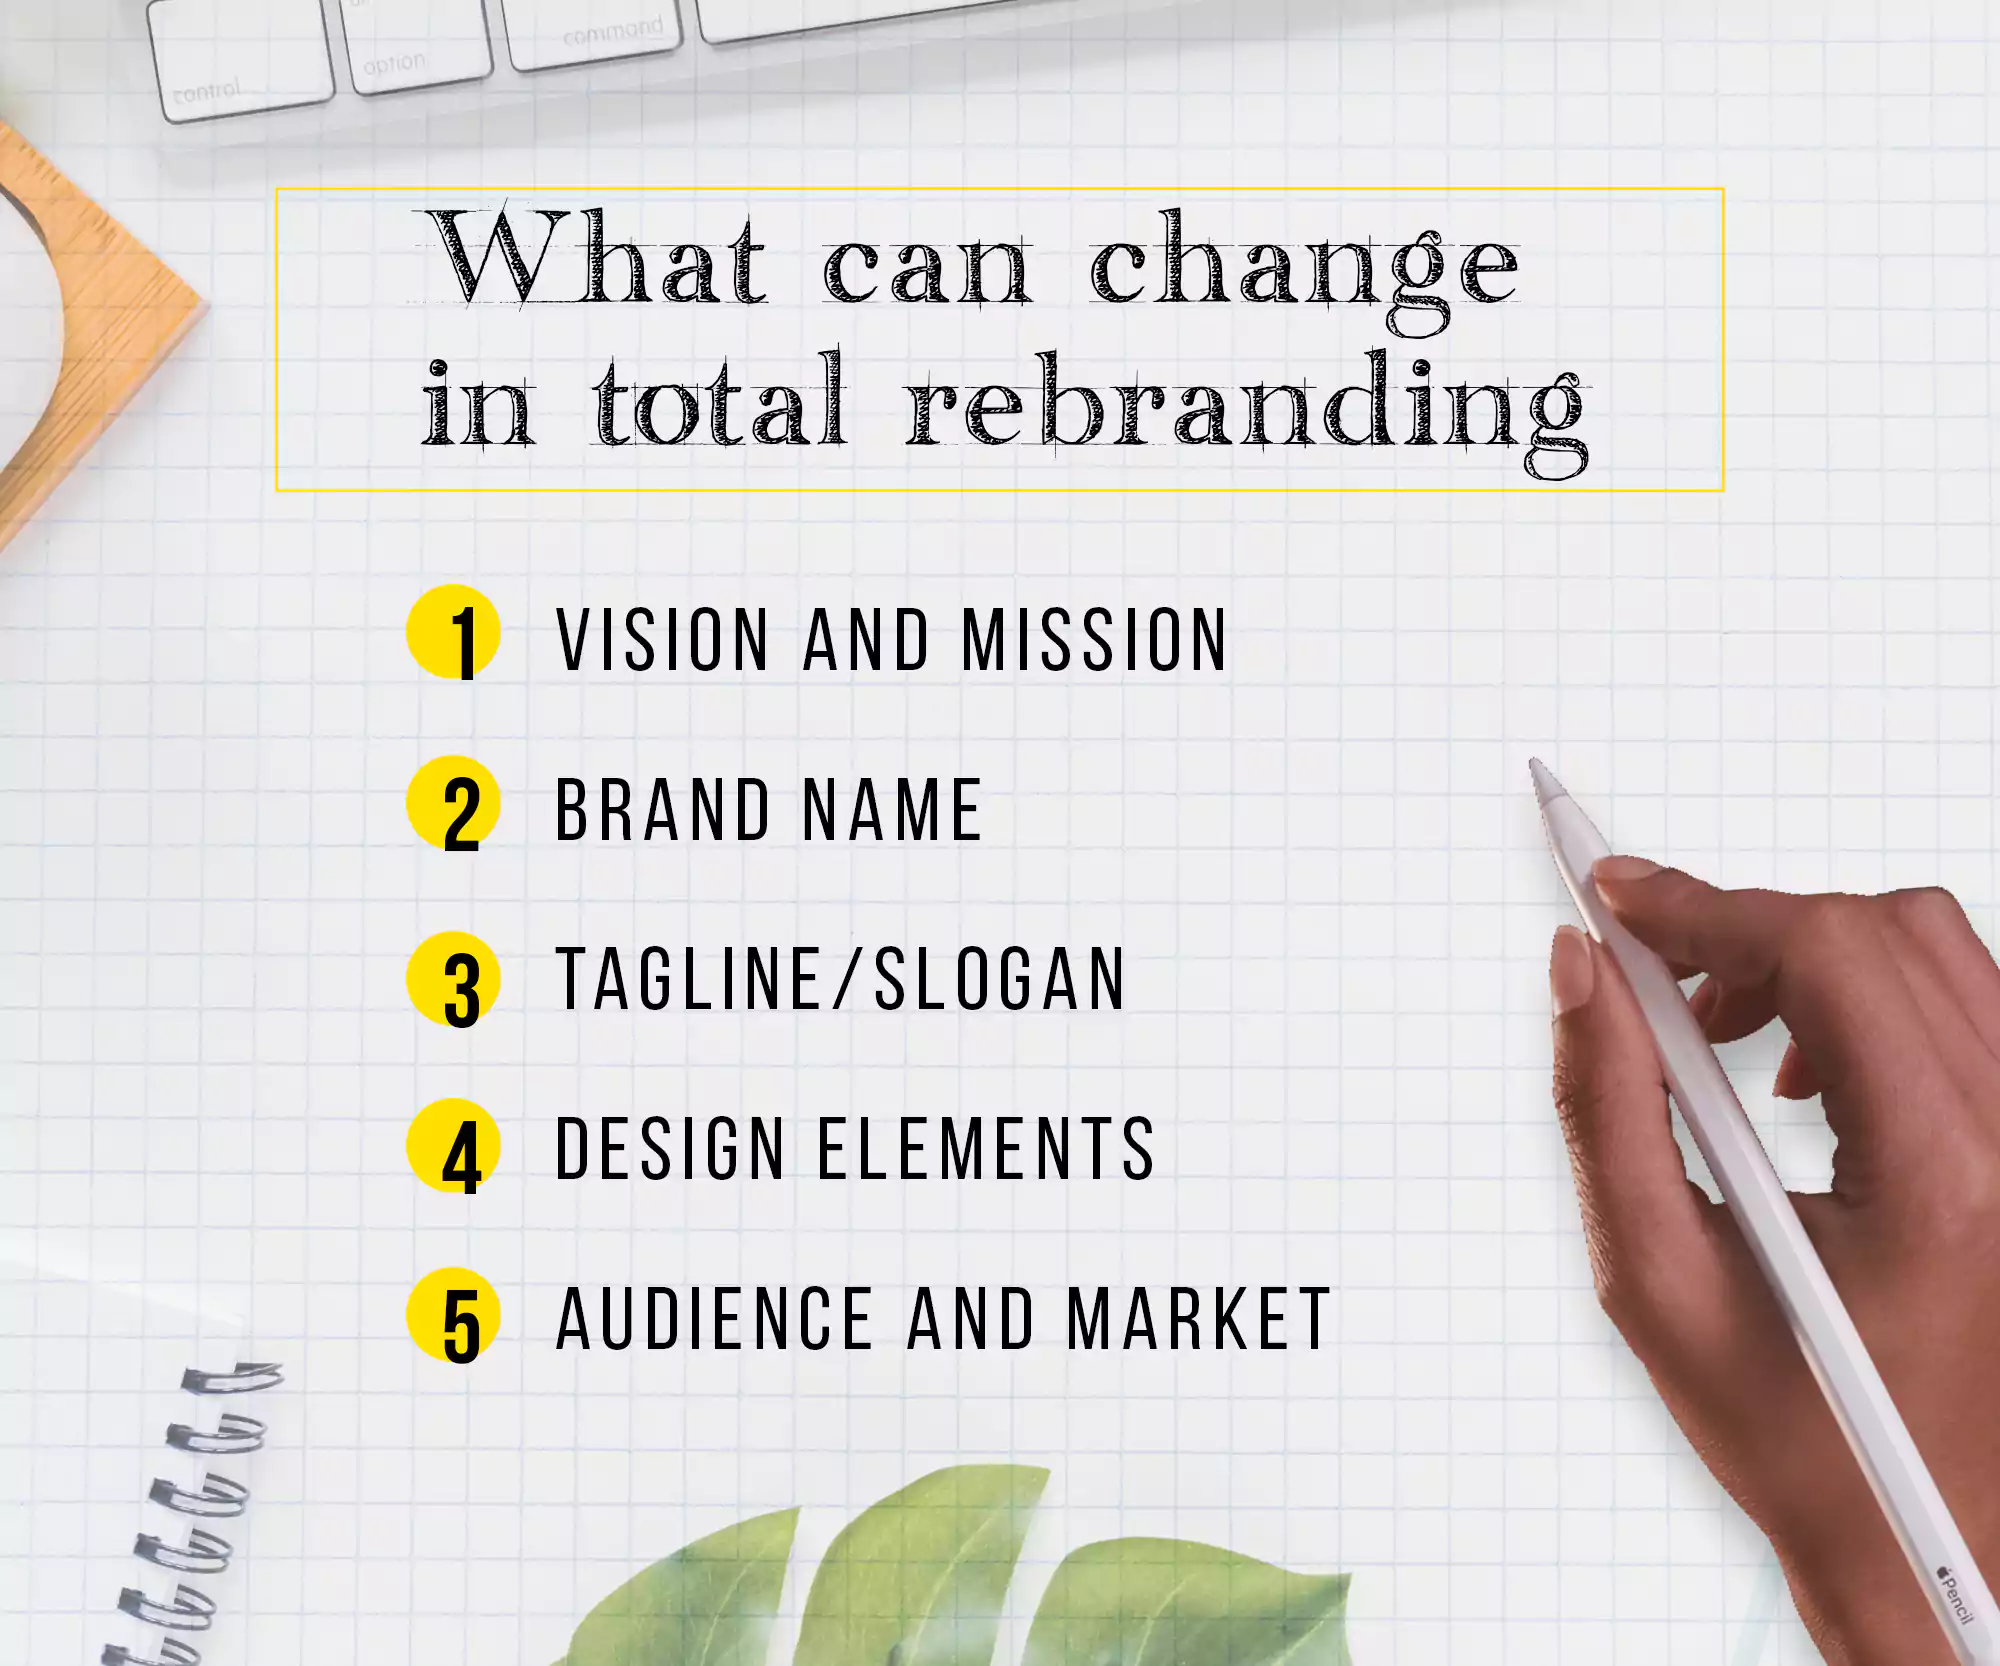 What can change during total rebranding